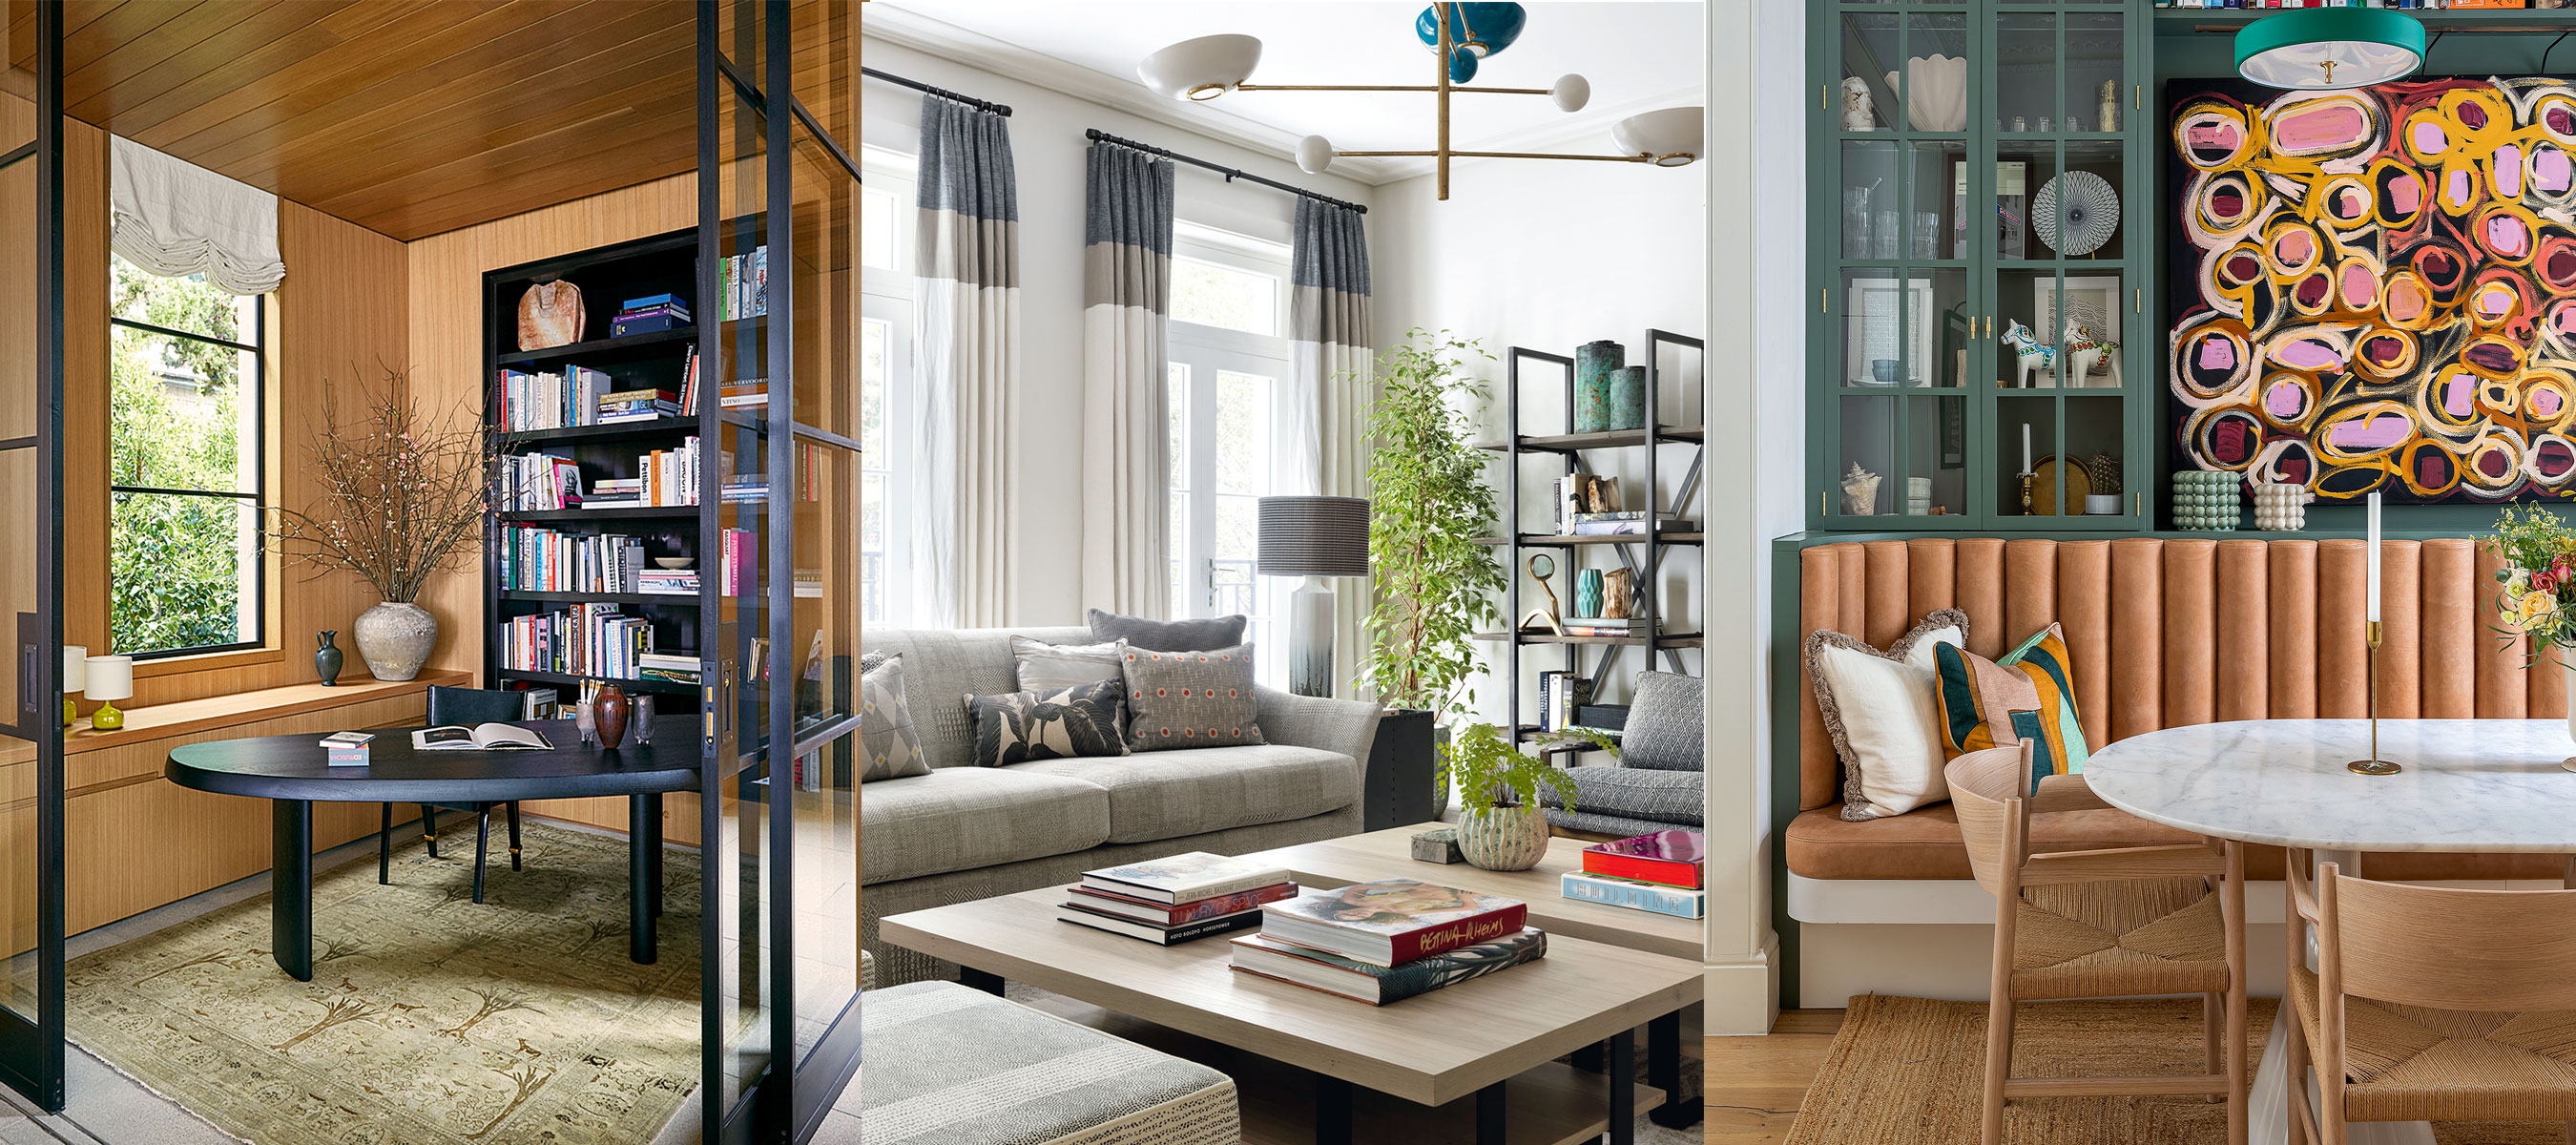 Our 7 Best Tricks for A Small Apartment Interior Design